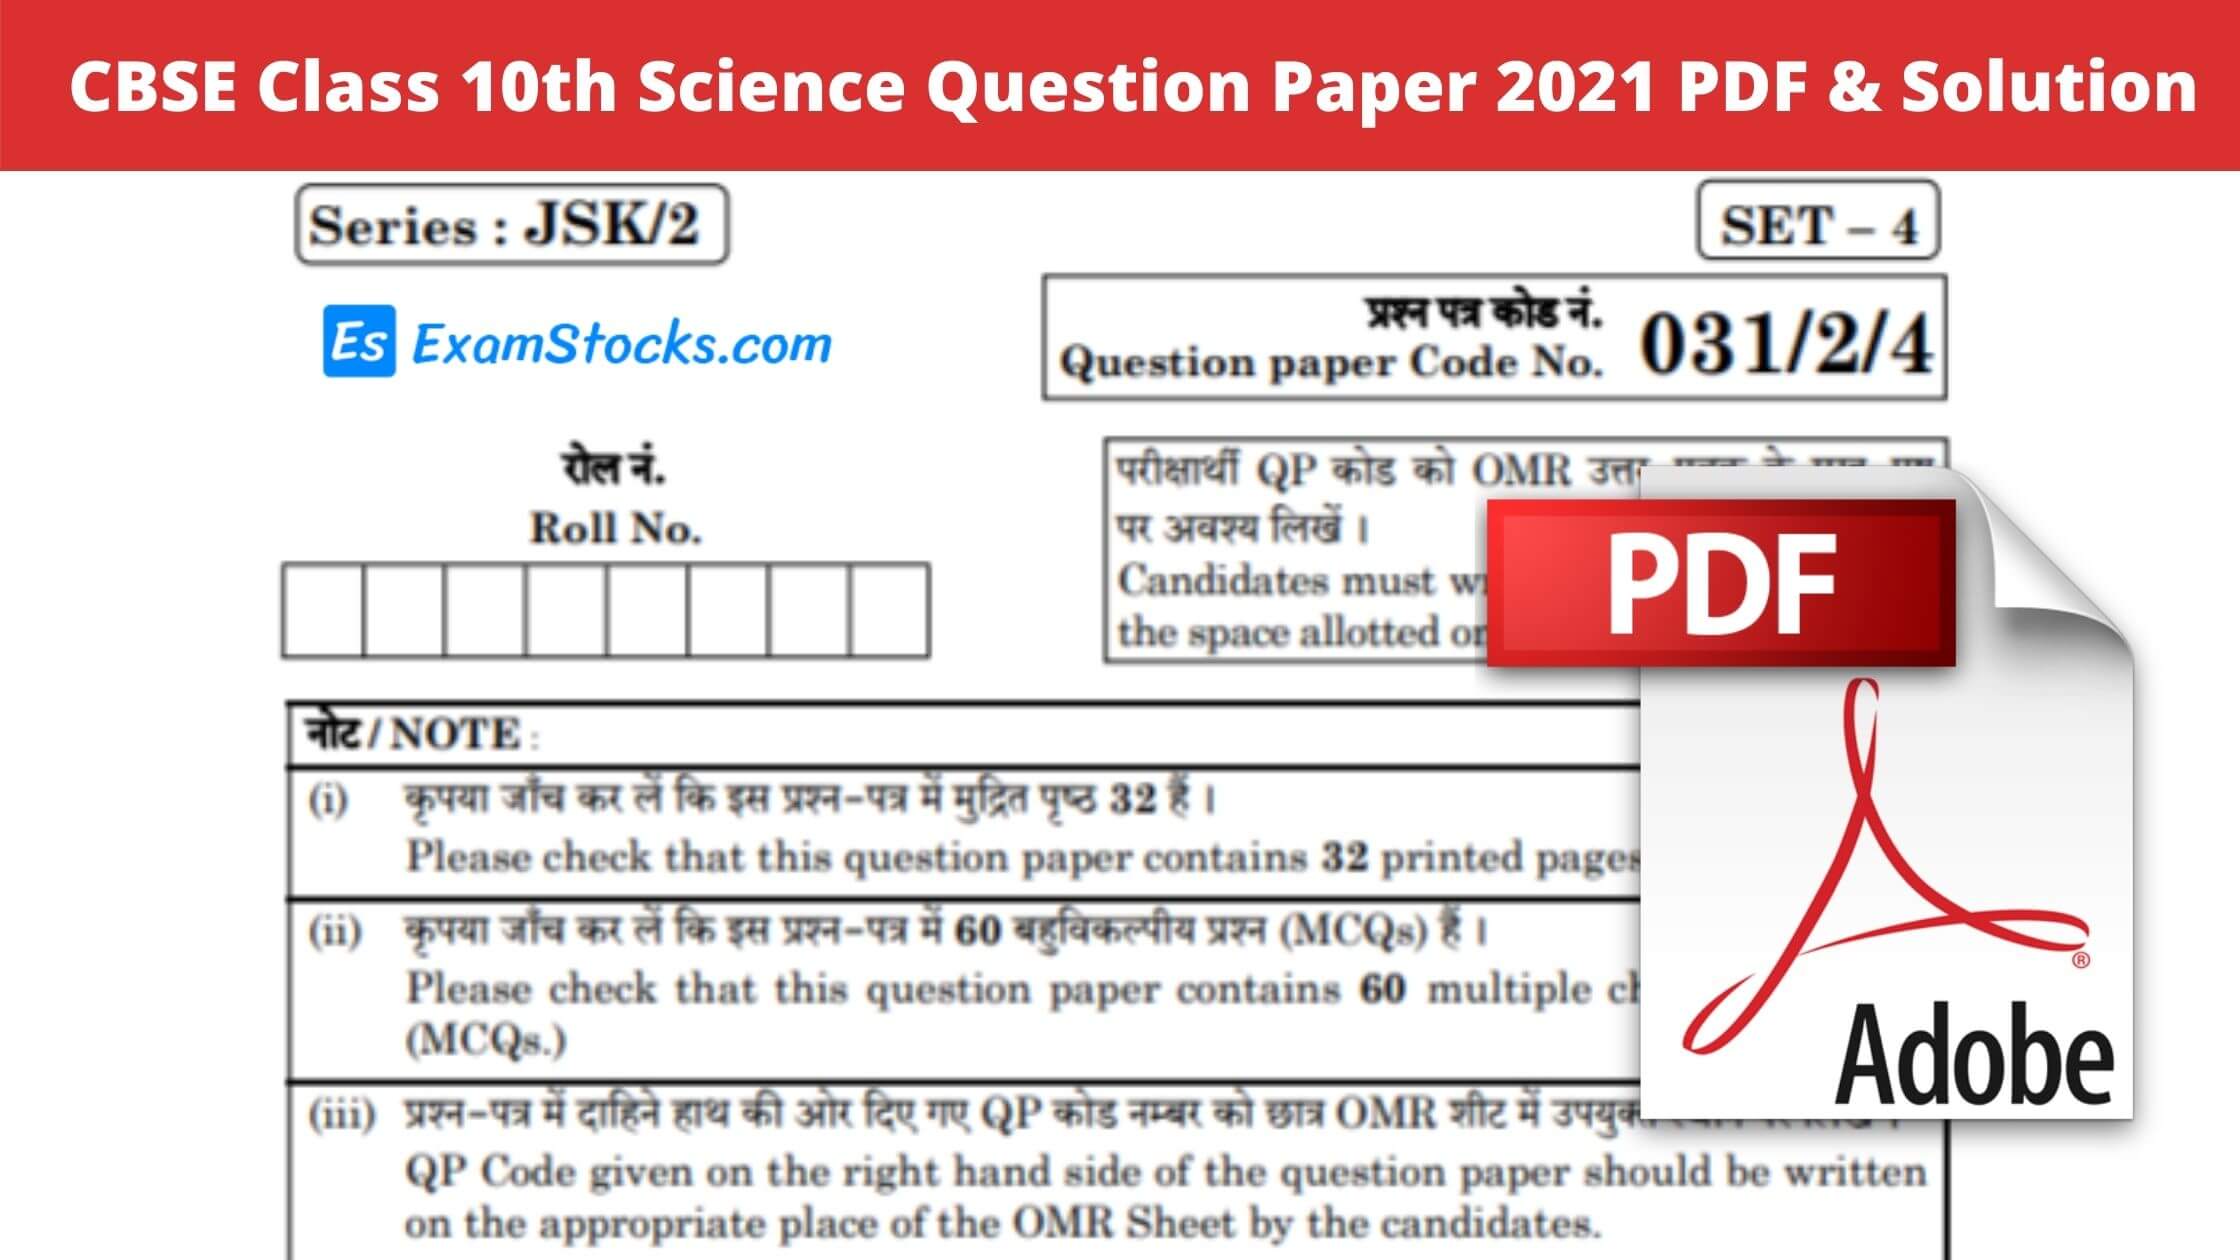 CBSE Class 10th Science Question Paper 2021 PDF